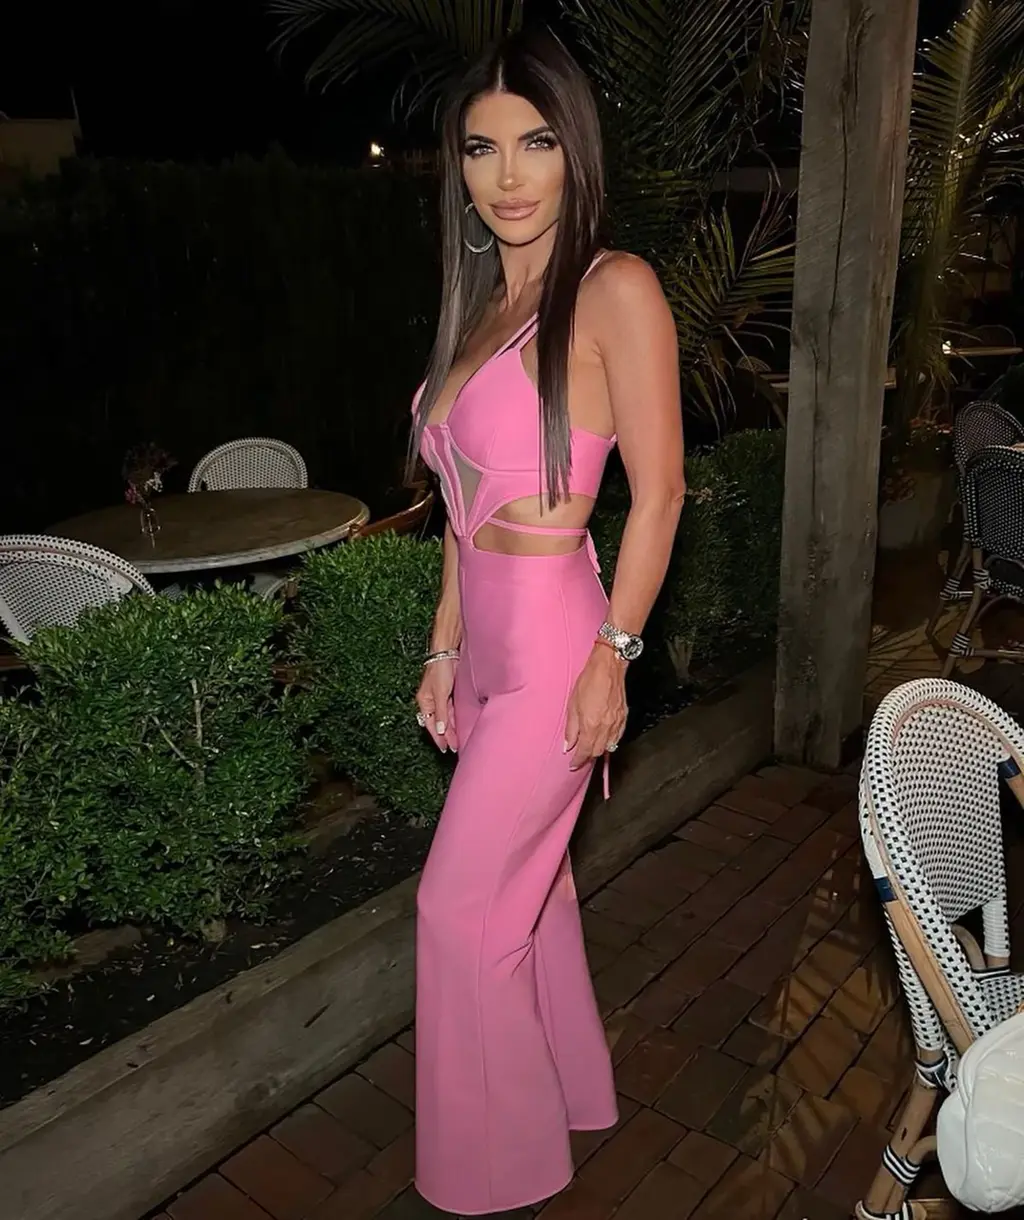 Teresa Giudice during her barbie themed birthday party